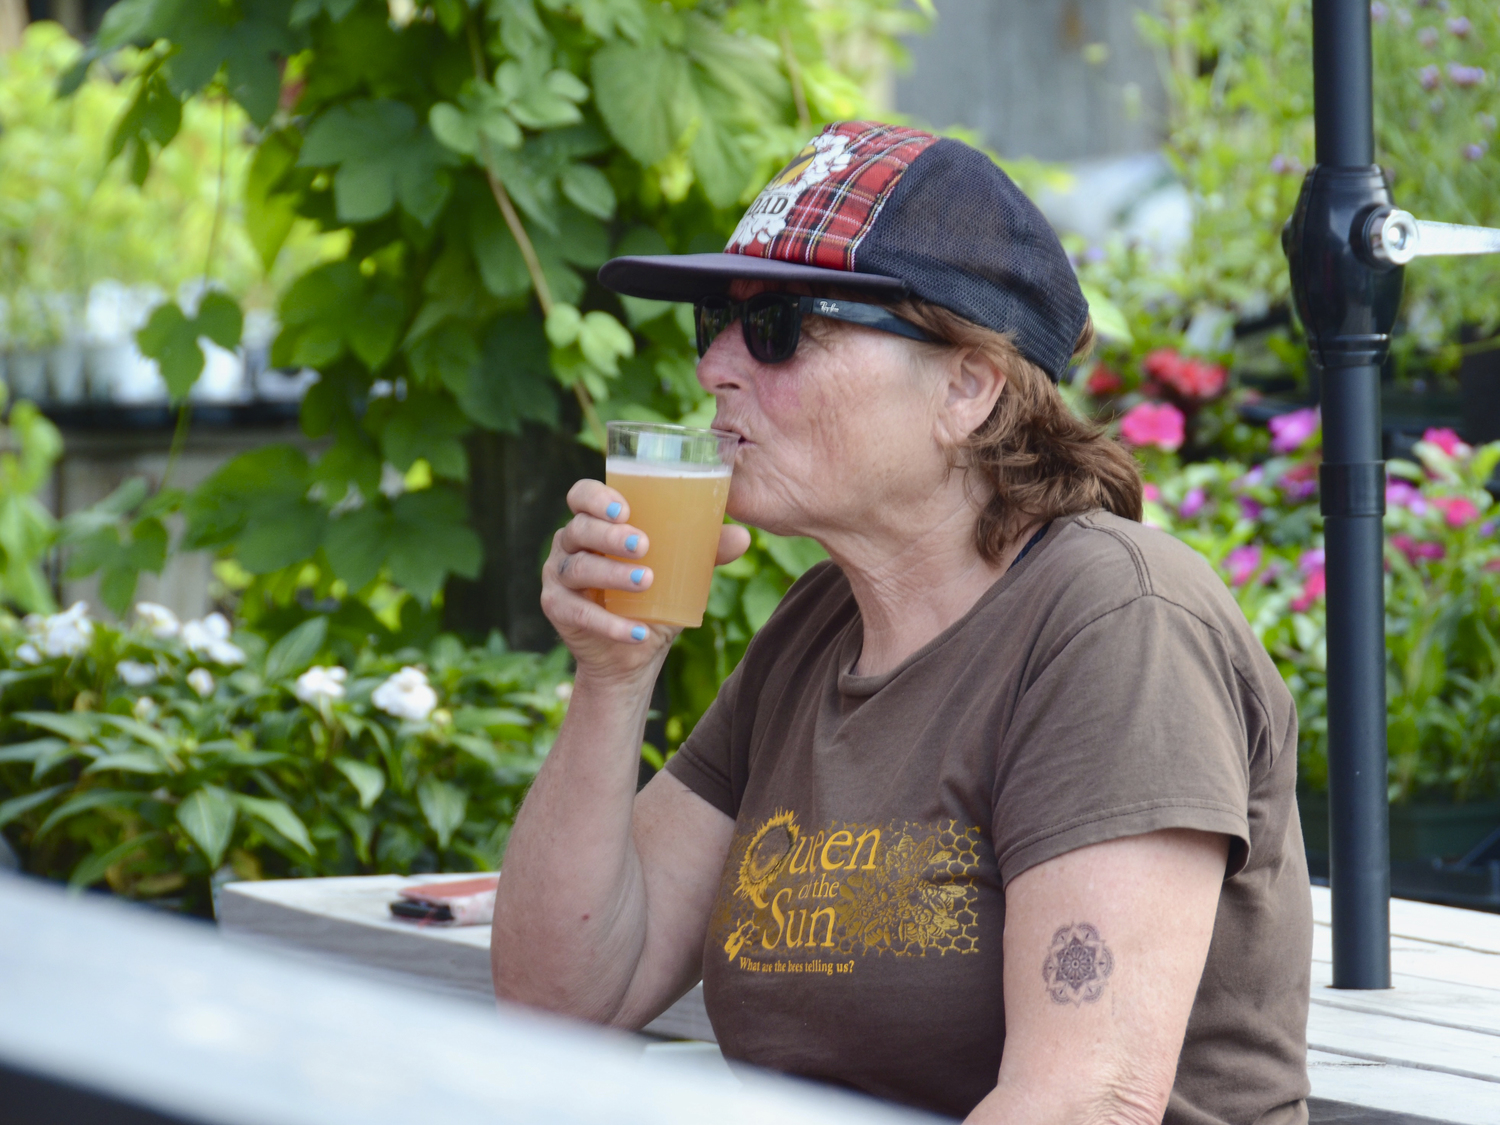 The Express Magazine's Sips of Summer series will return for its second year starting June 5.